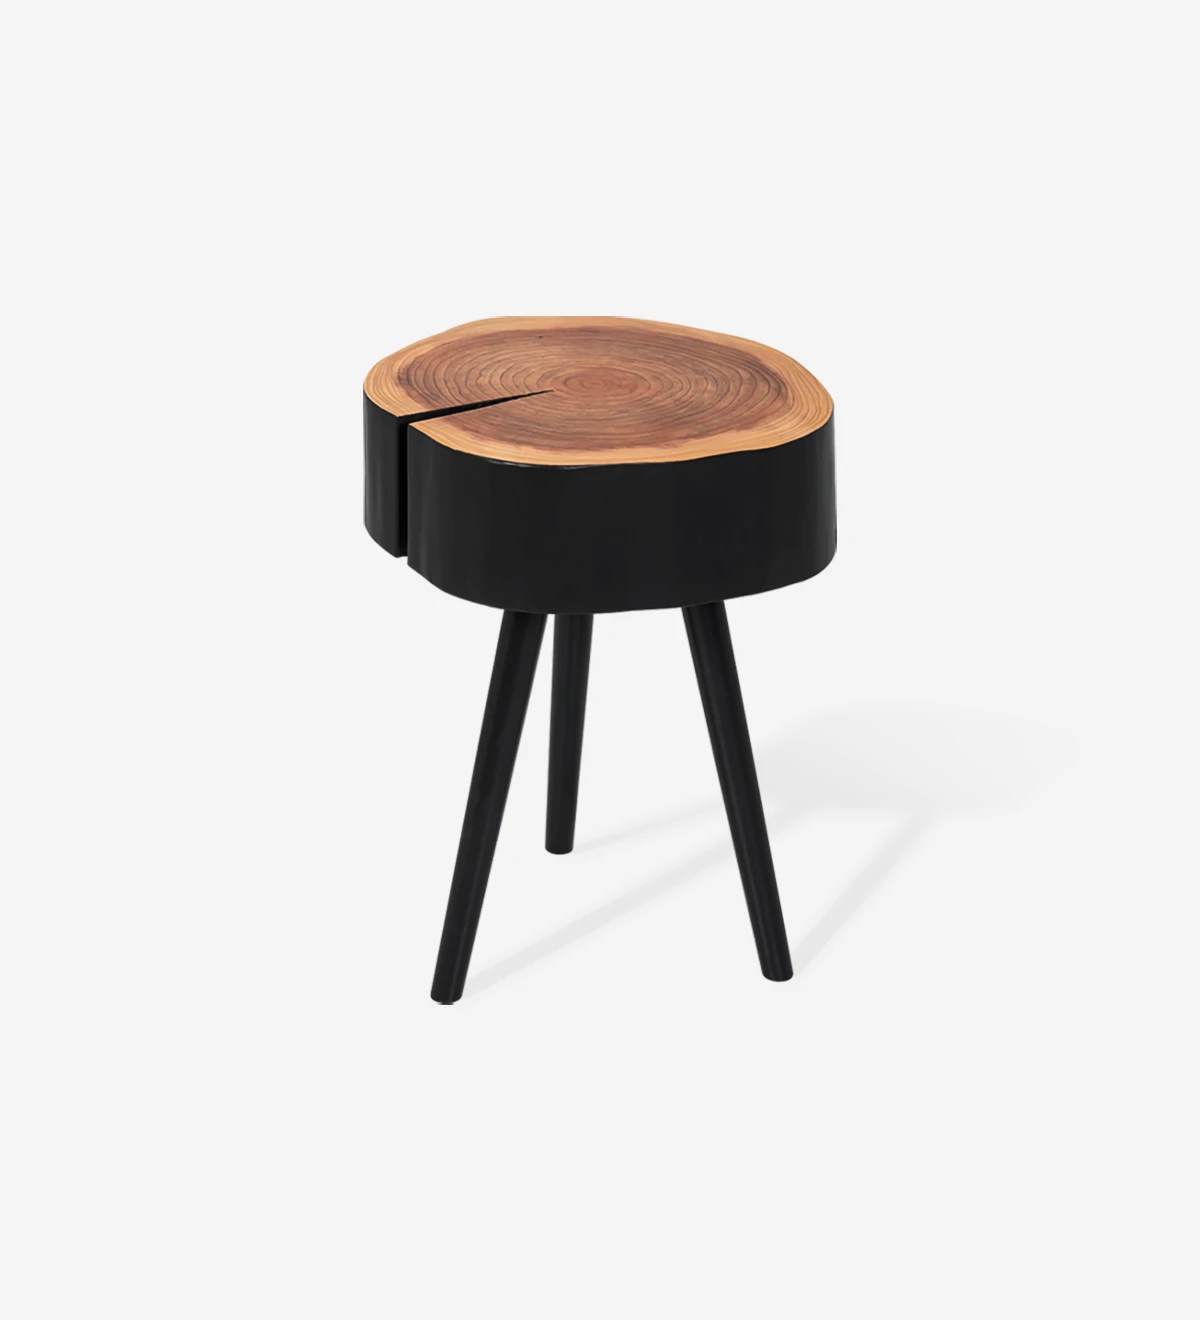 Trunk side table in natural cryptomeria wood lacquered in black, with 3 turned legs lacquered in black.